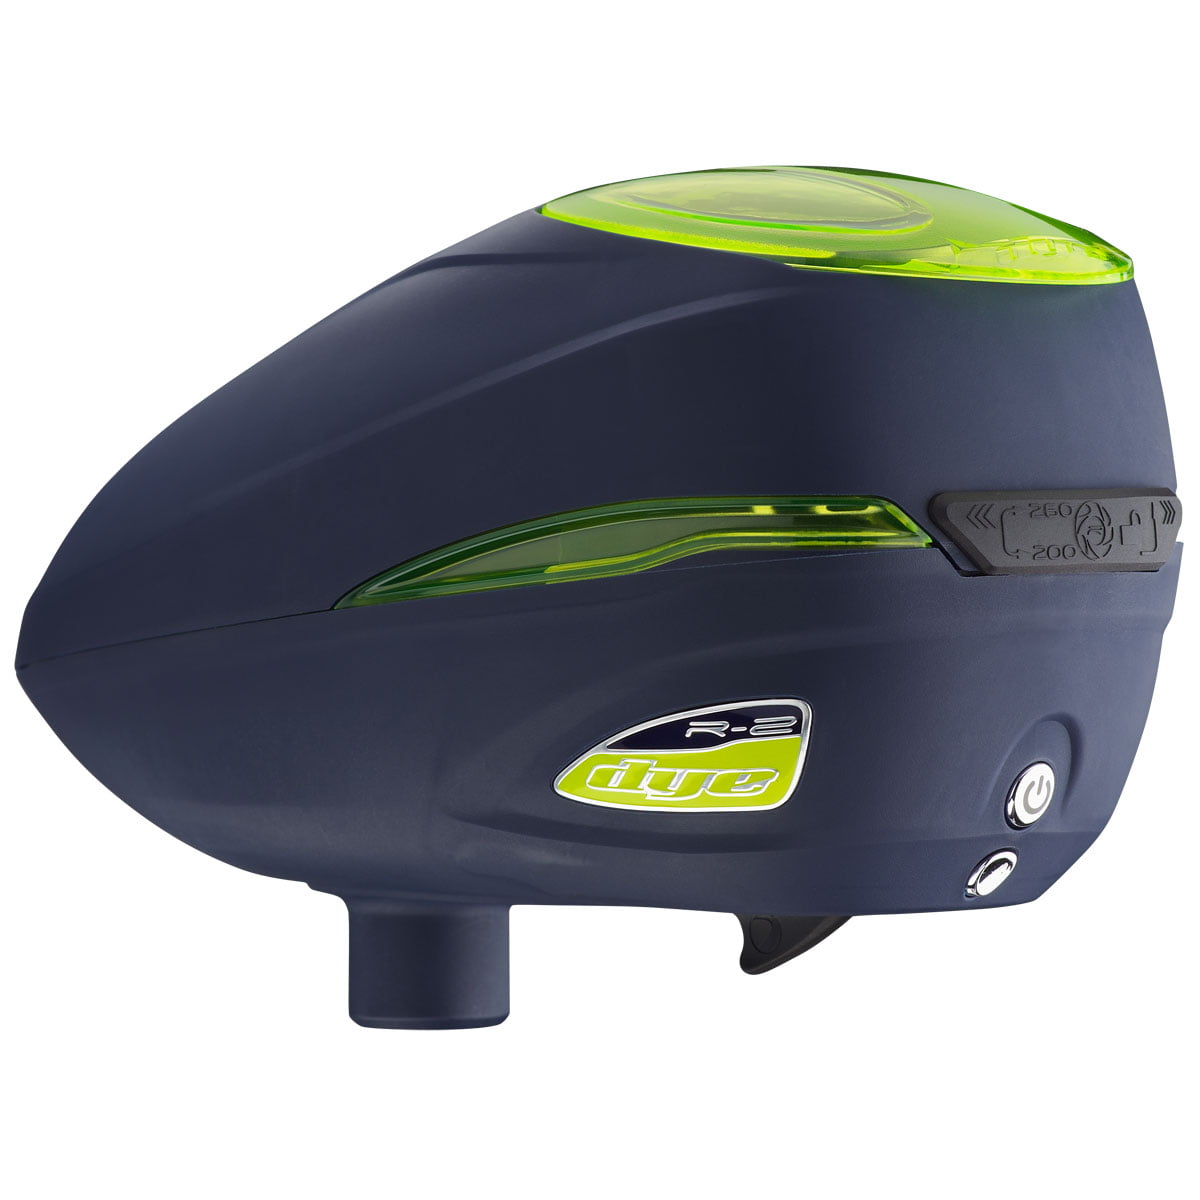 Dye Rotor r-2 Paintball Loader Navy/Lime Green